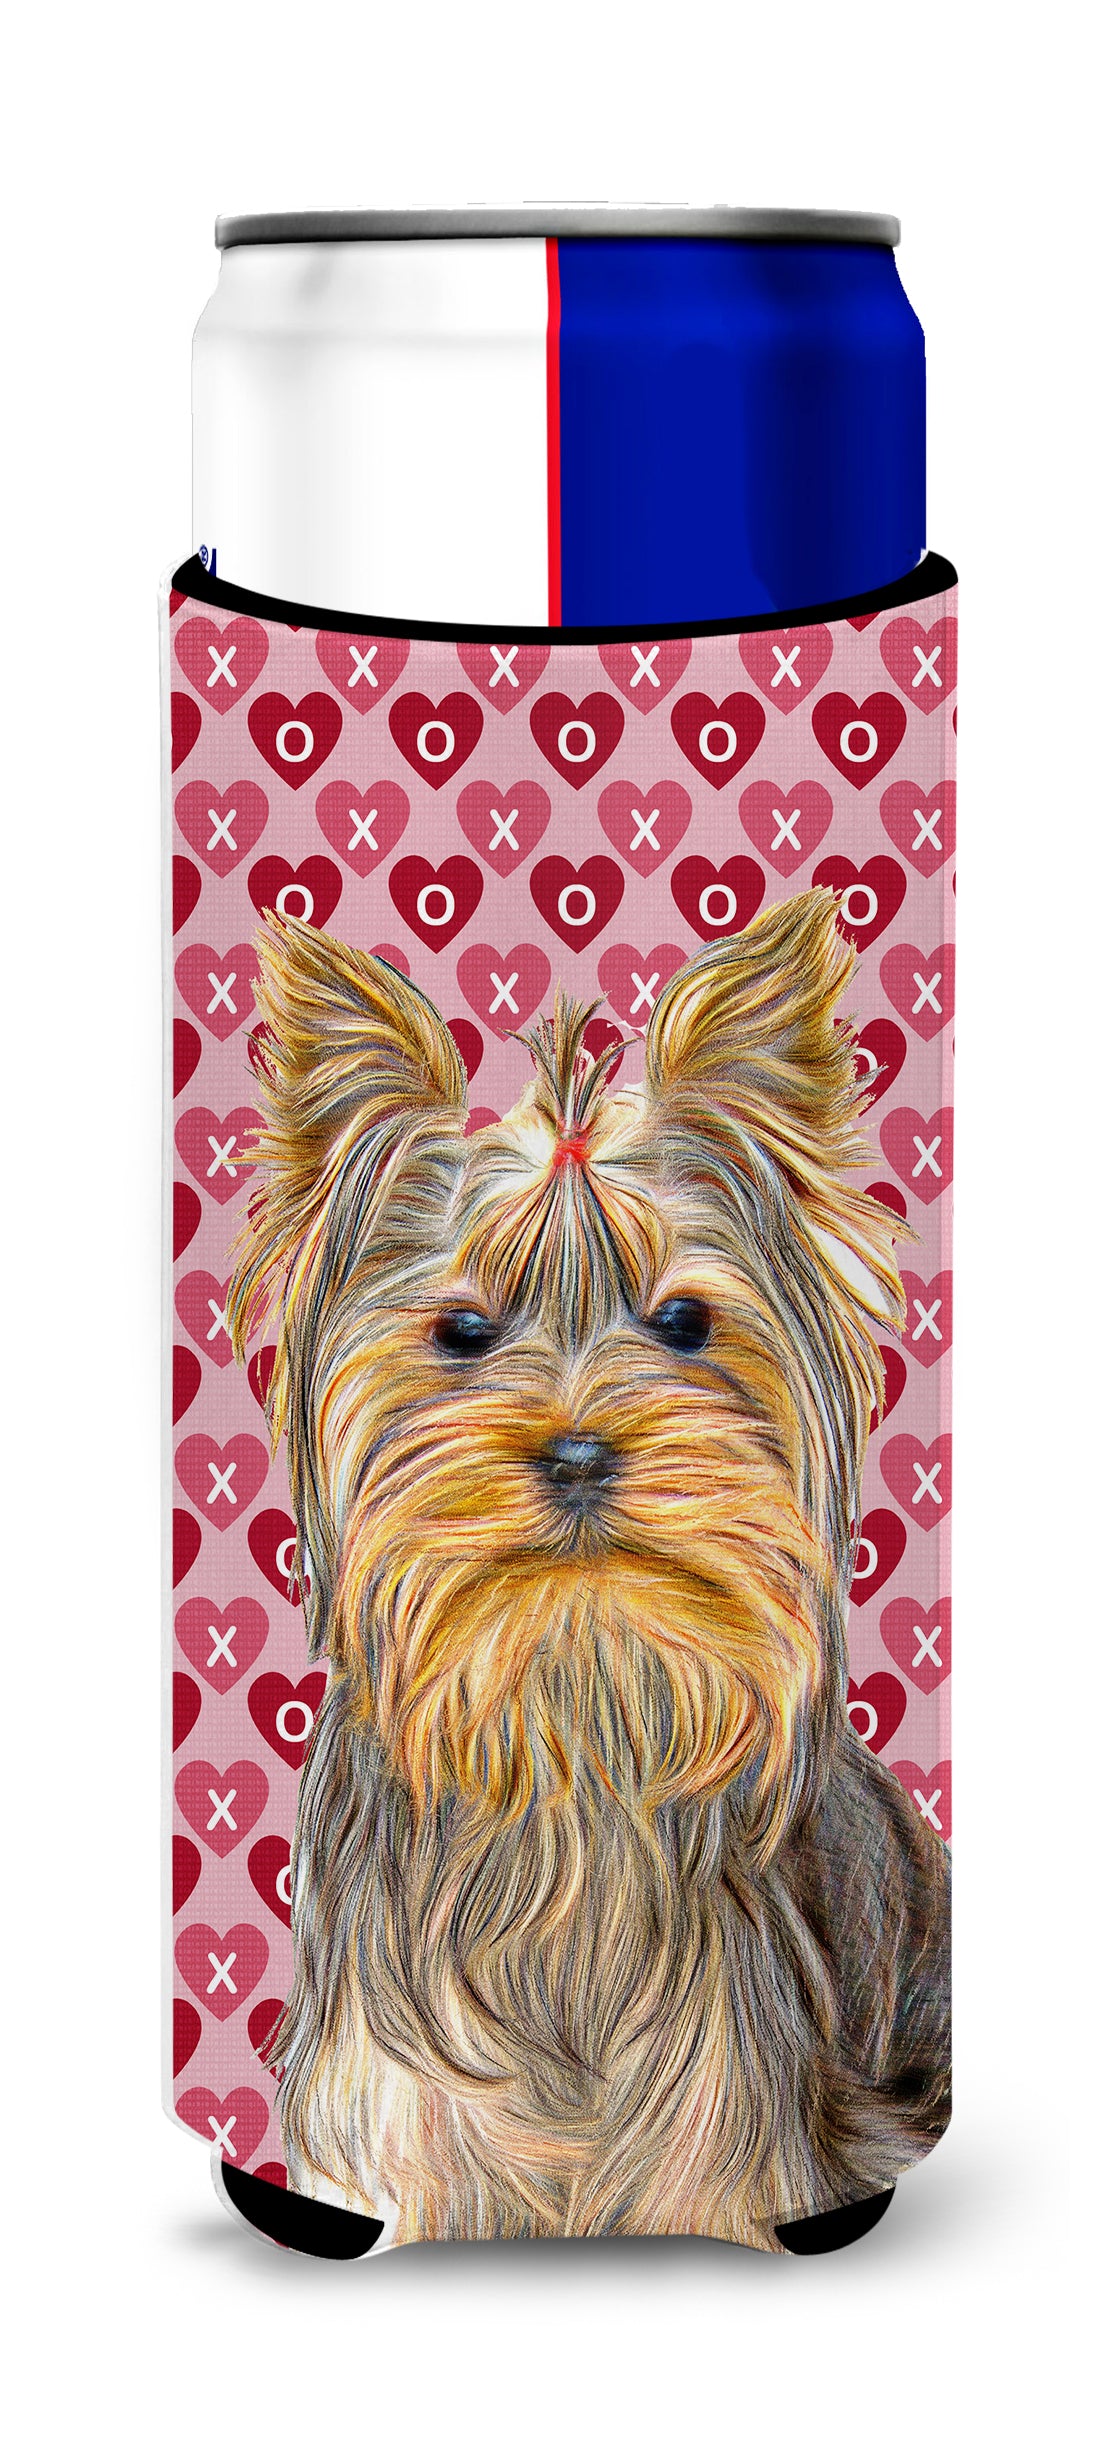 Hearts Love and Valentine's Day Yorkie / Yorkshire Terrier Ultra Beverage Insulators for slim cans KJ1191MUK